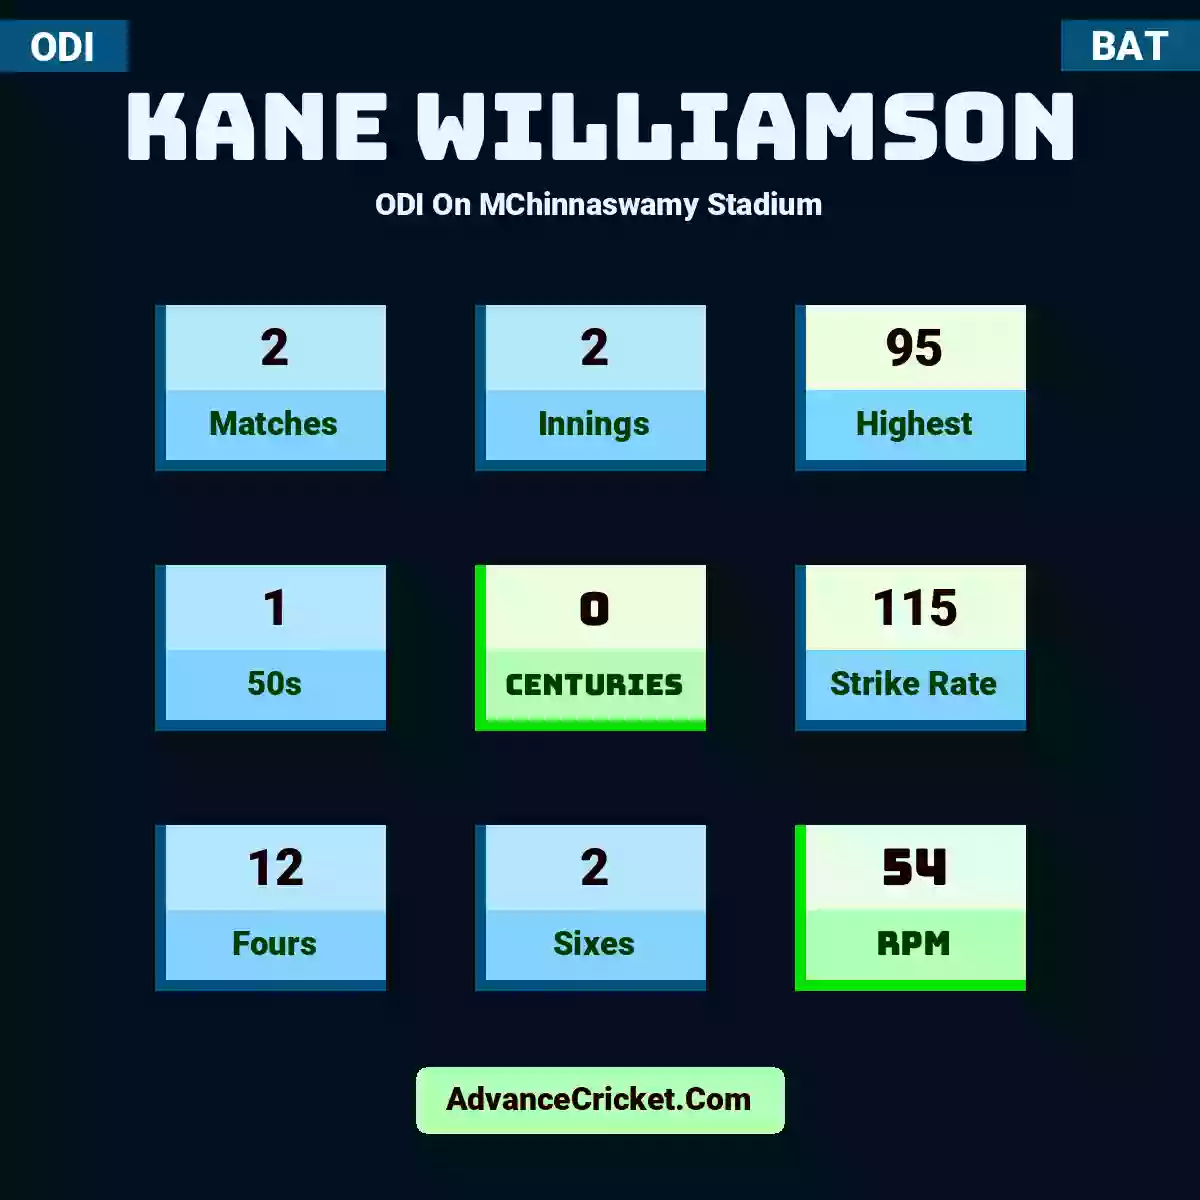 Kane Williamson ODI  On MChinnaswamy Stadium, Kane Williamson played 2 matches, scored 95 runs as highest, 1 half-centuries, and 0 centuries, with a strike rate of 115. K.Williamson hit 12 fours and 2 sixes, with an RPM of 54.